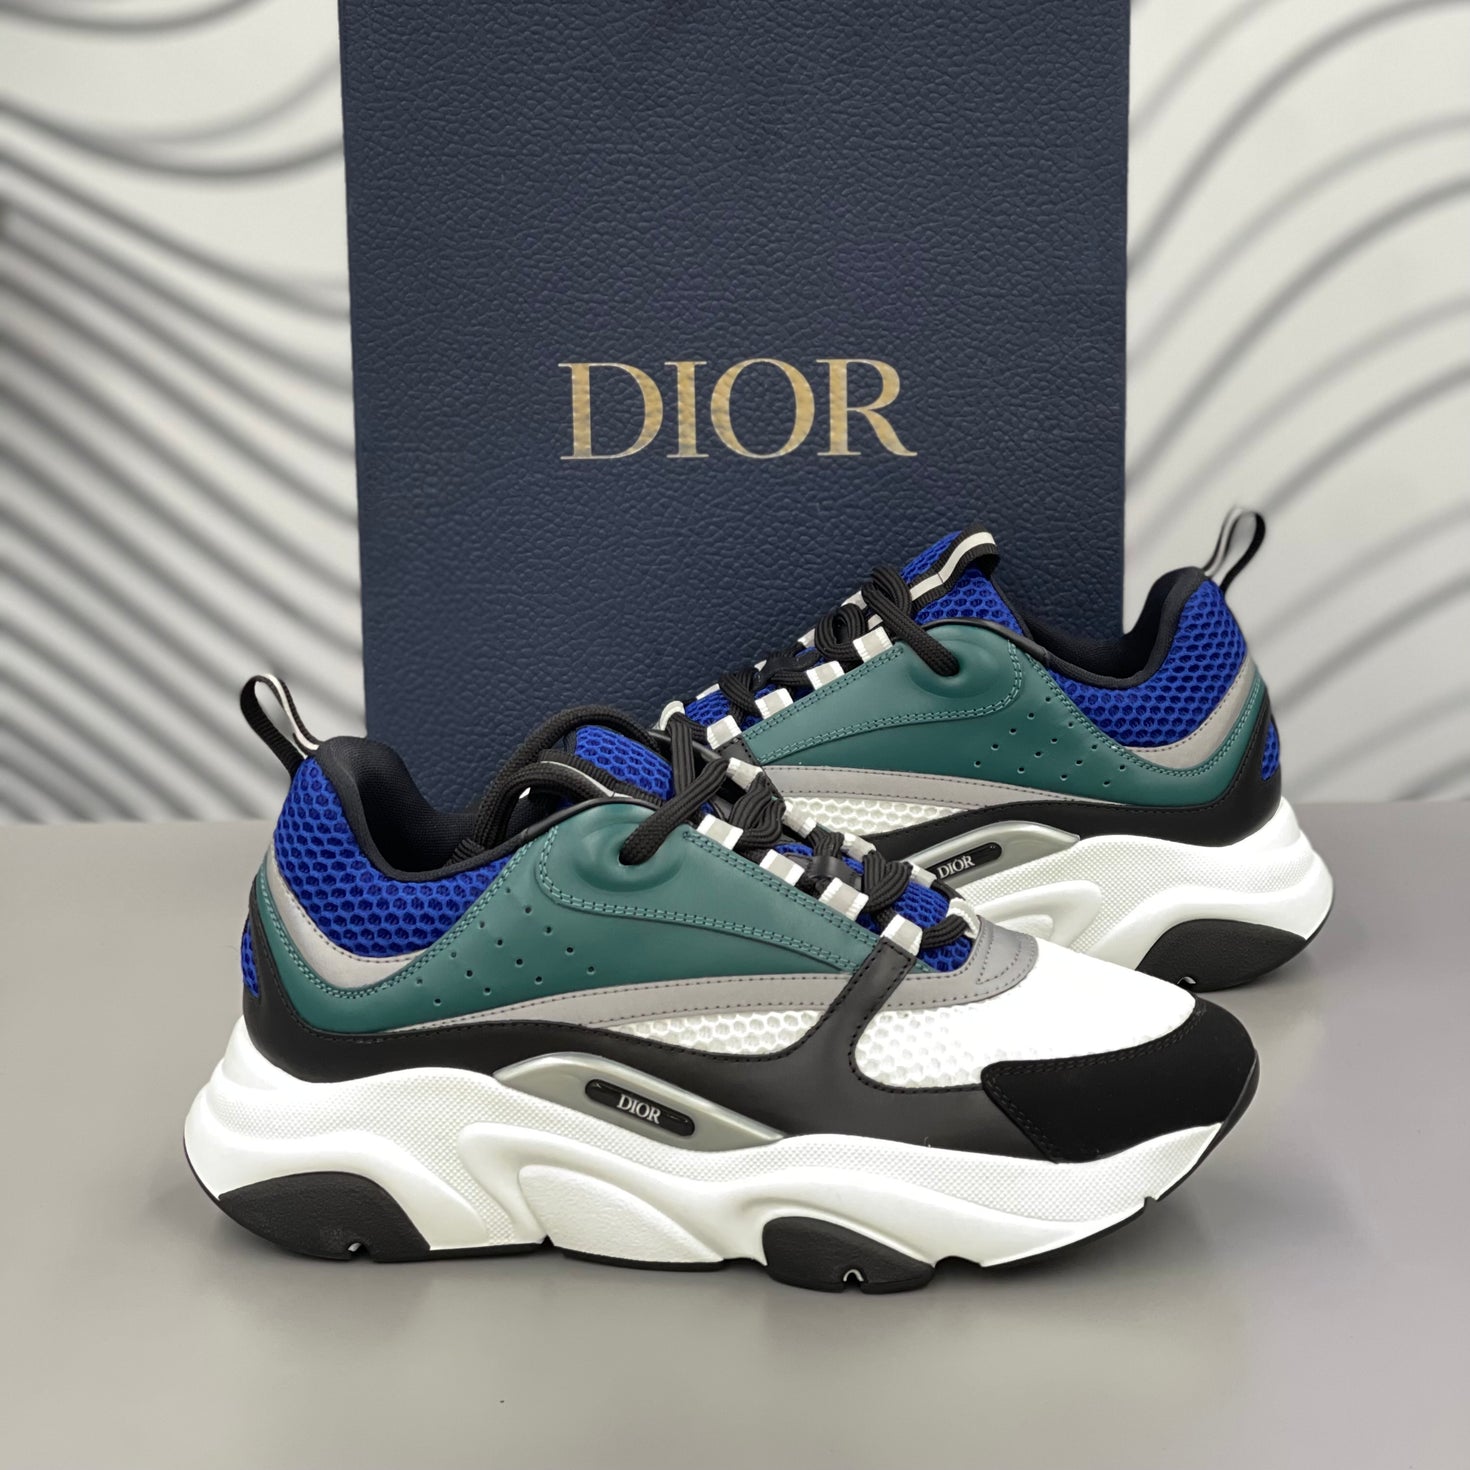 Dior B22 “Green And Blue” | Request